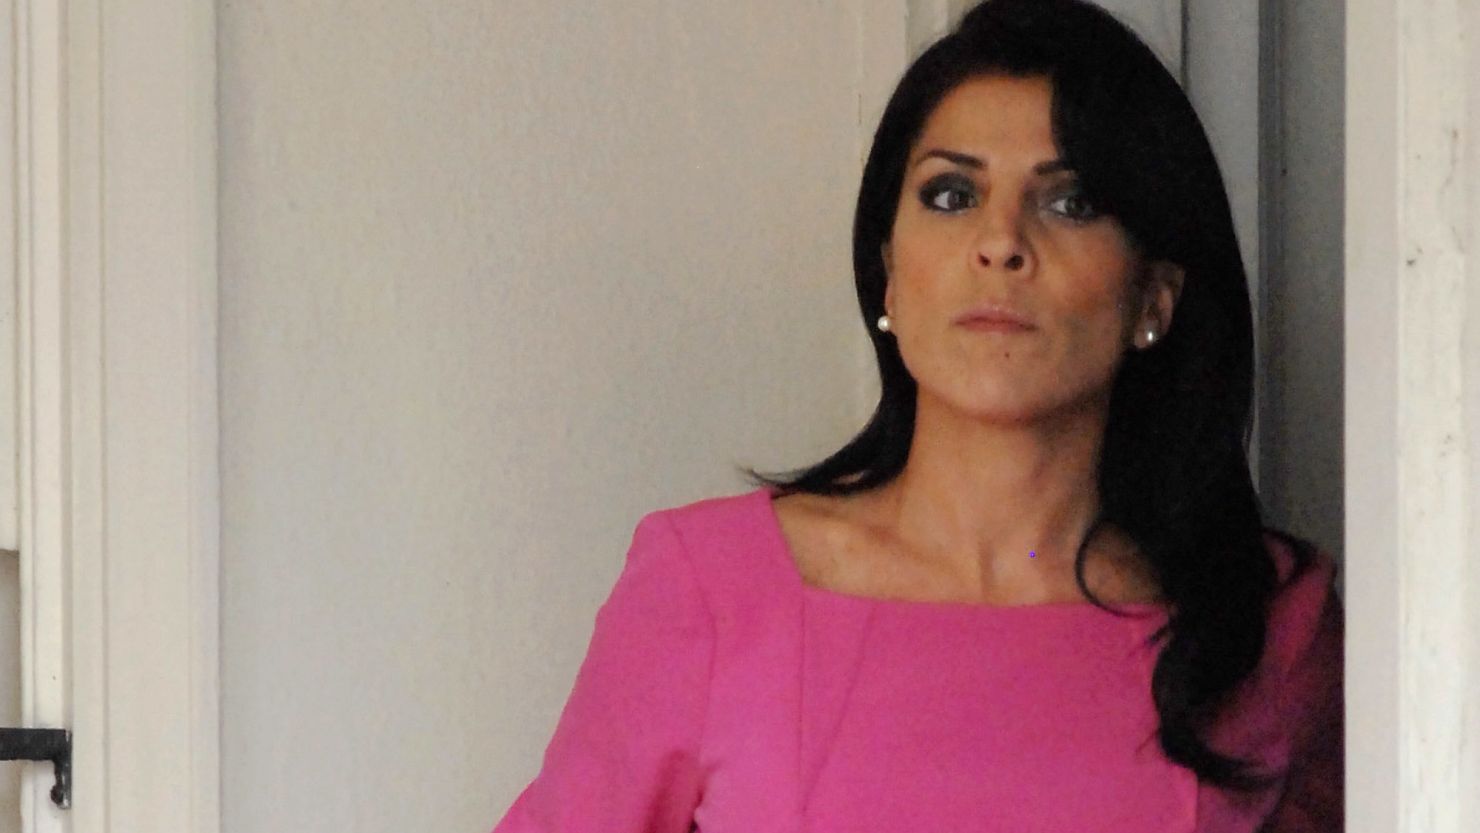 Jill Kelley's attorneys are working to salvage her reputation in the wake of the David Petraeus scandal.